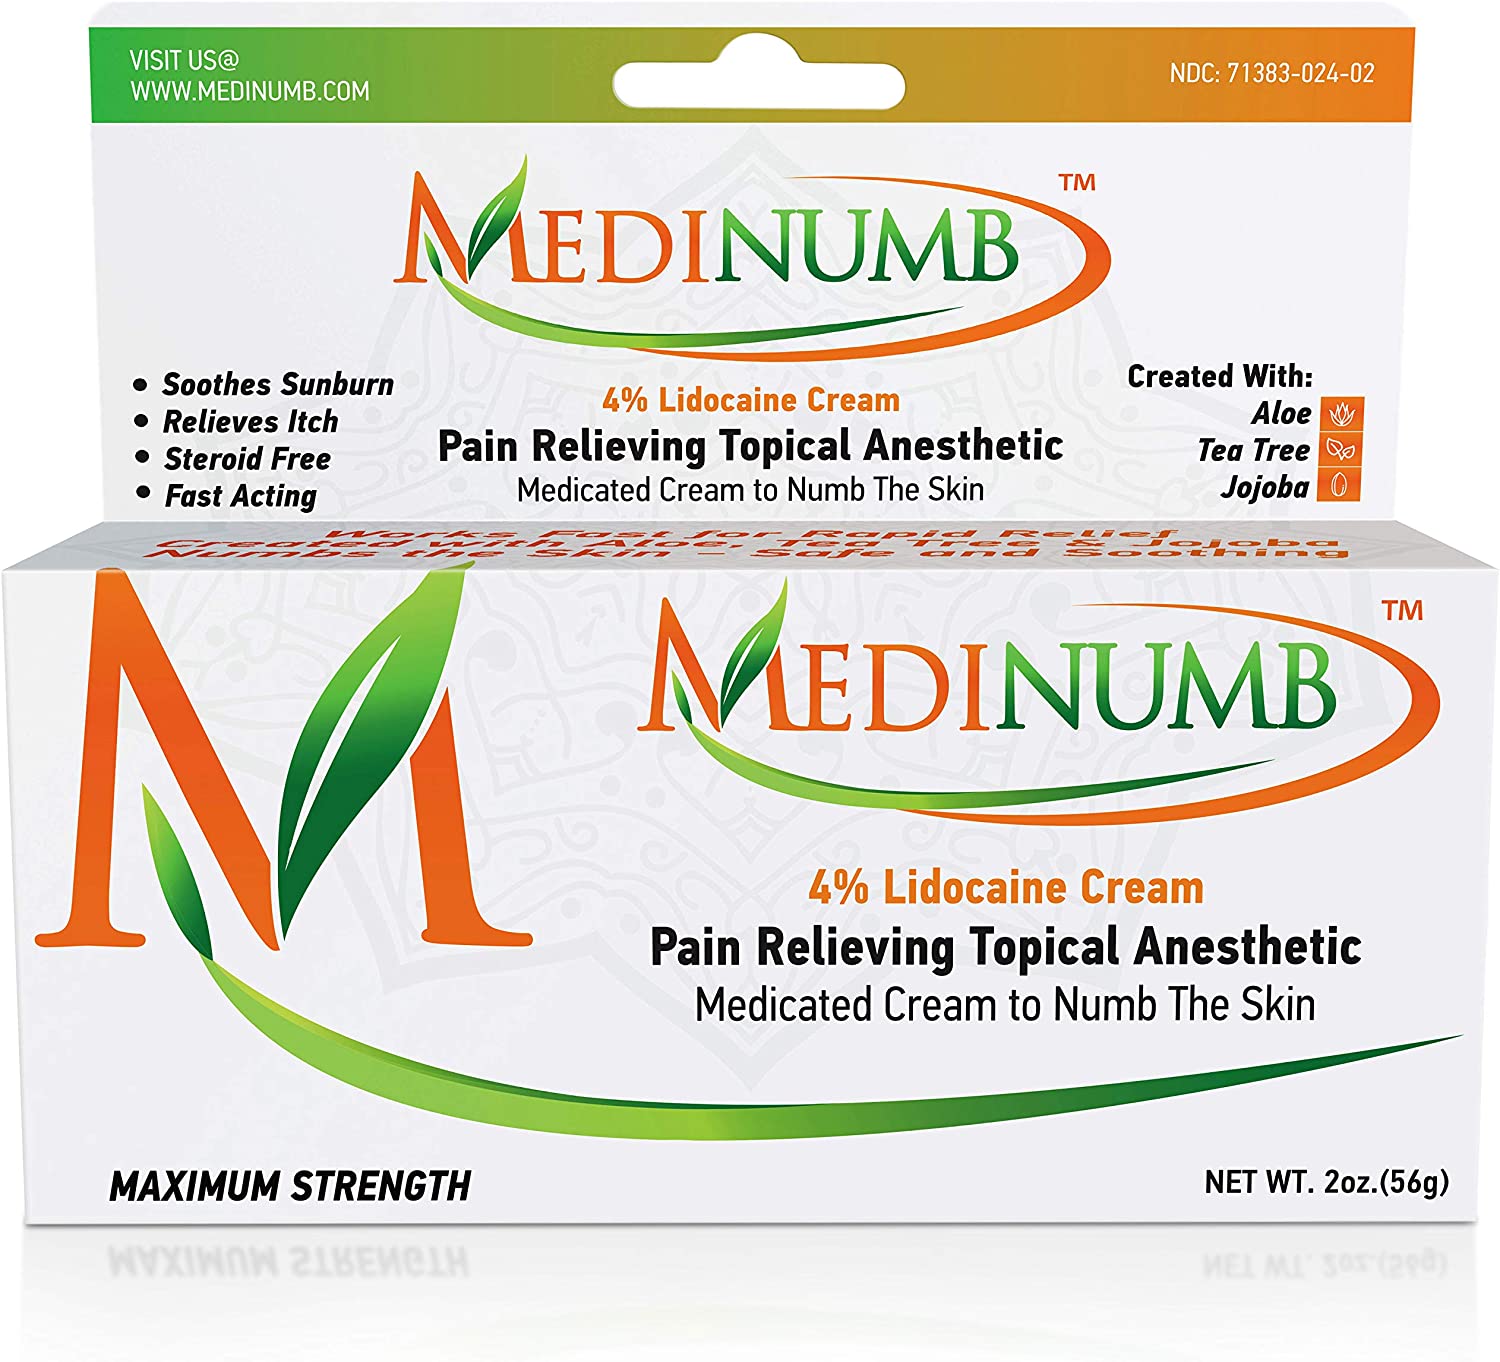 How can I Use Numbing Cream Before Getting a Tattoo  Official DrNumb USA